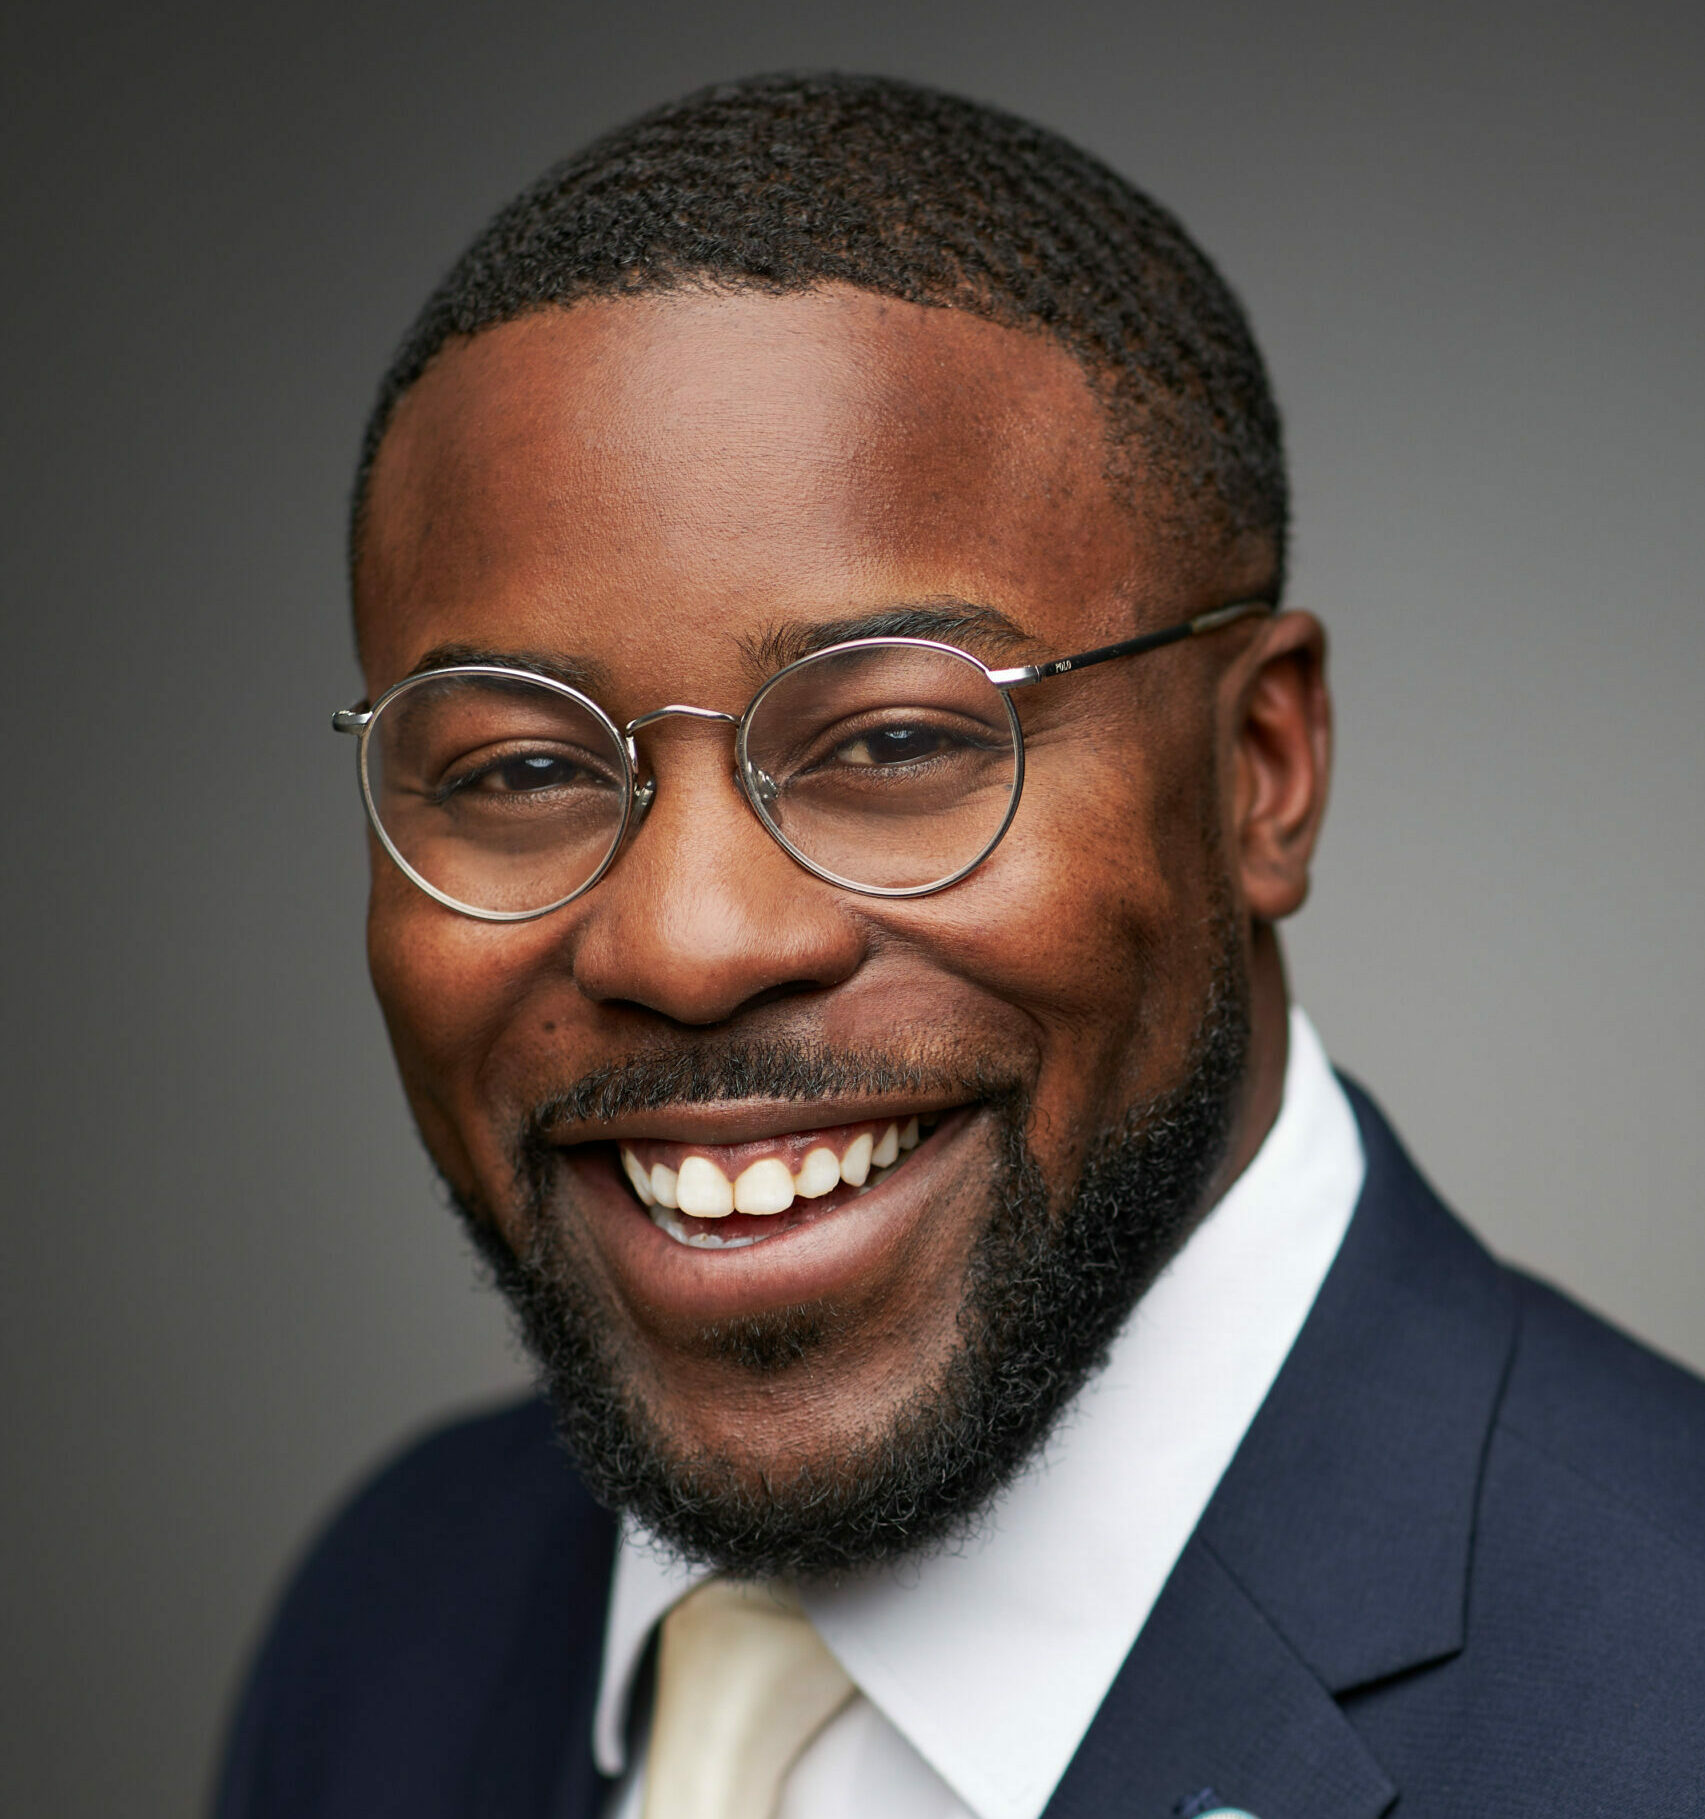 black man suit and glasses smiling